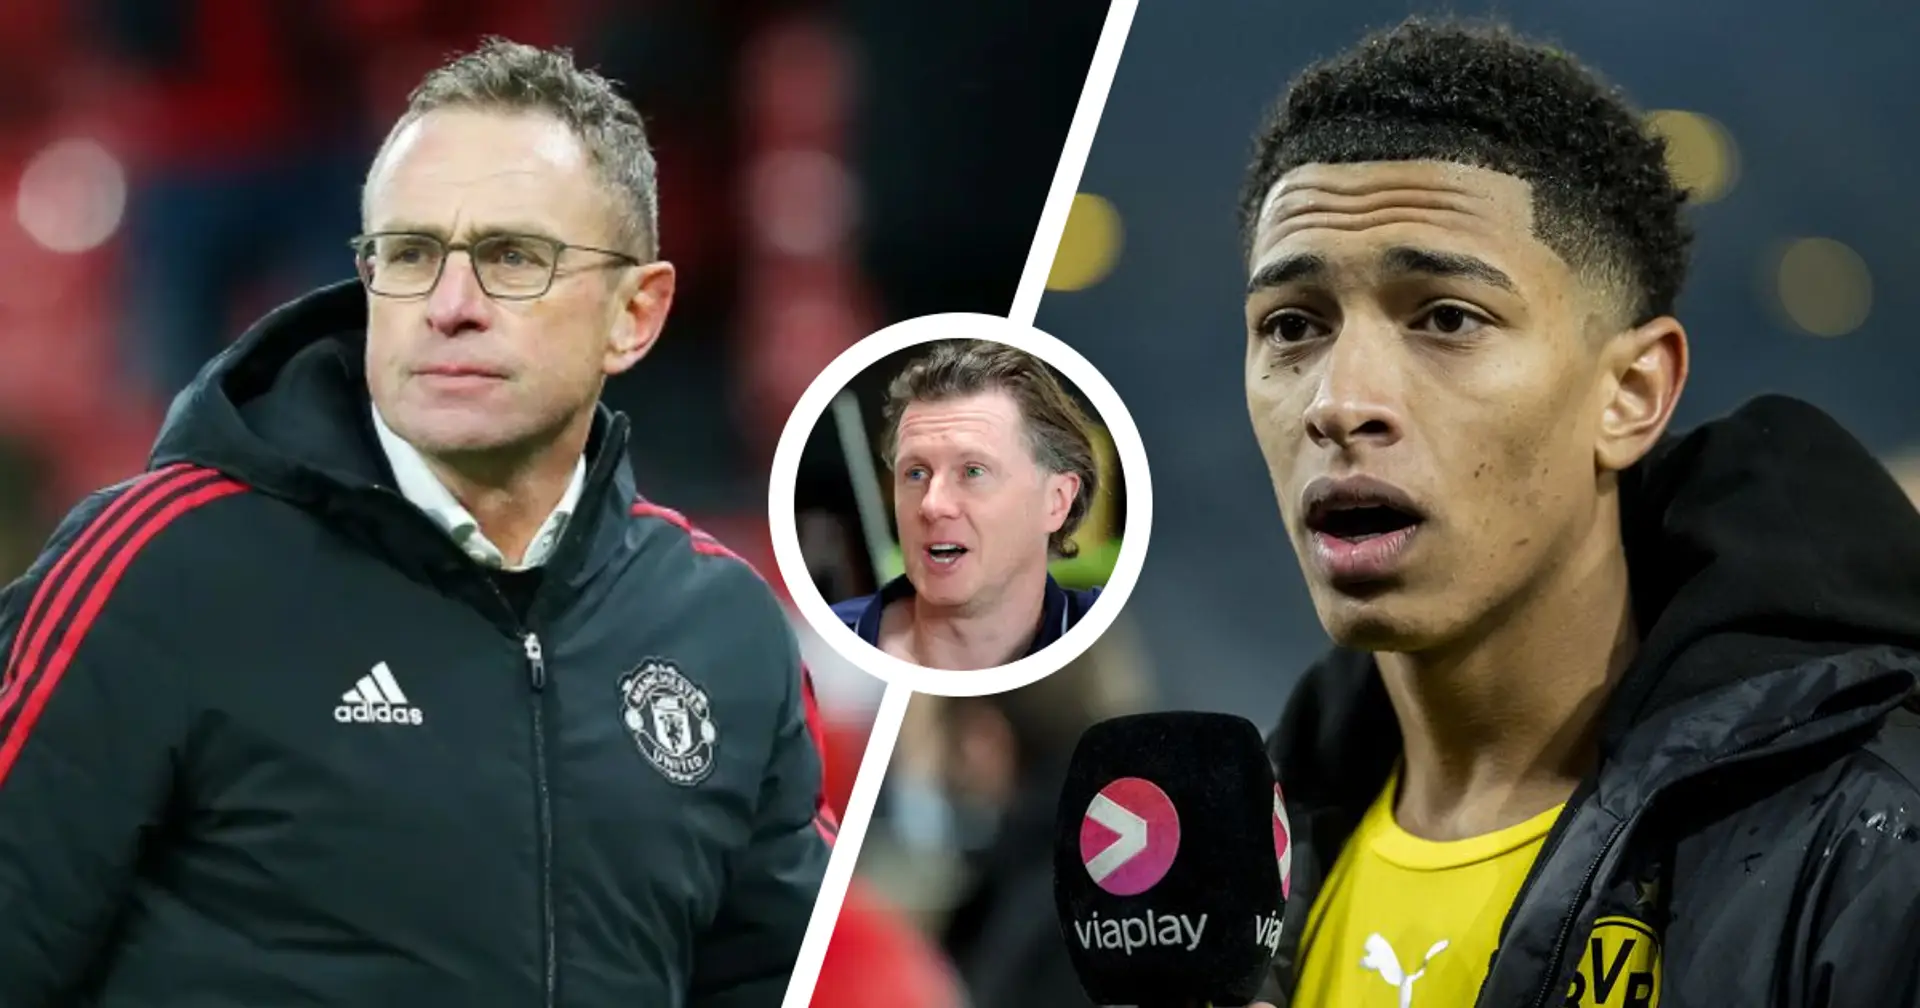 'If there's one team that needs Jude Bellingham, it's Man United': Ex-Liverpool winger Steve McManaman